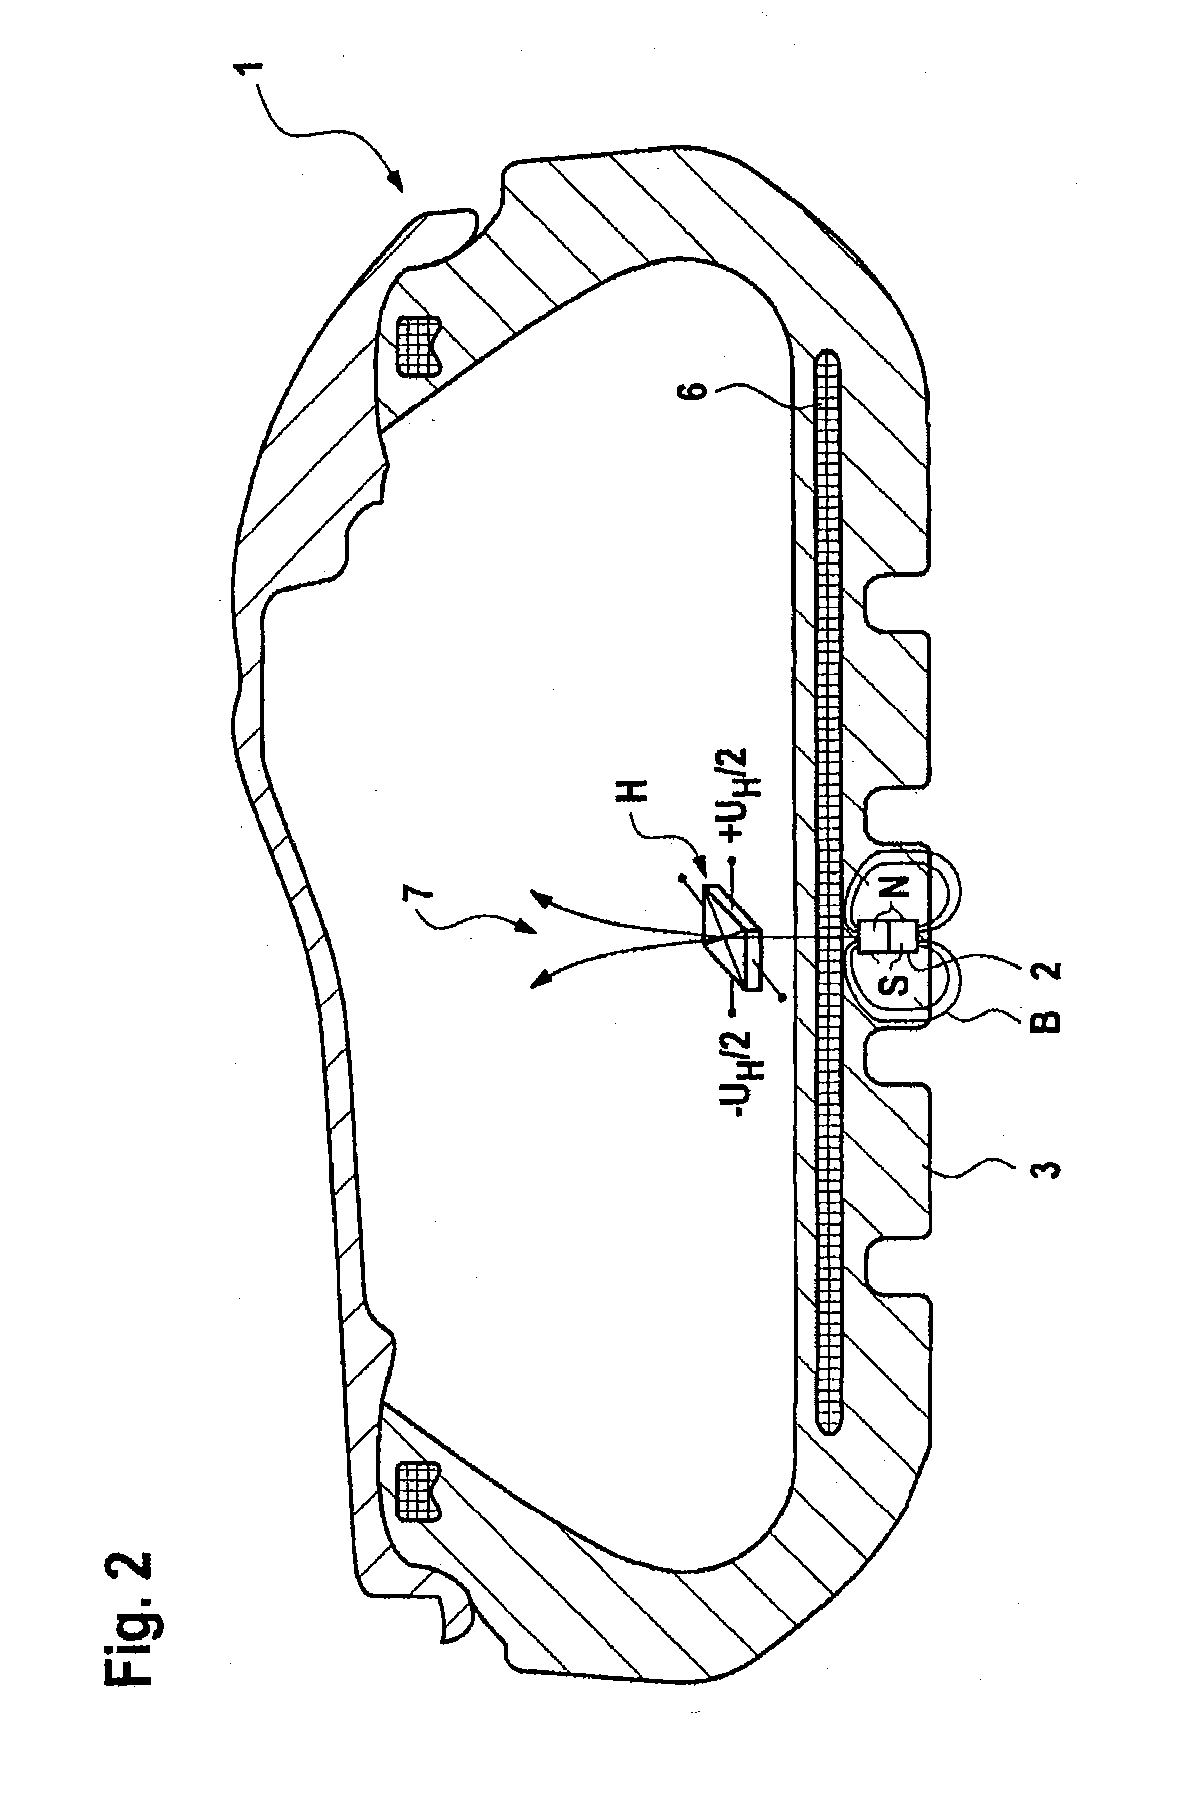 Method for determining the profile depth of a tire and/or a tire characteristic, and a tire